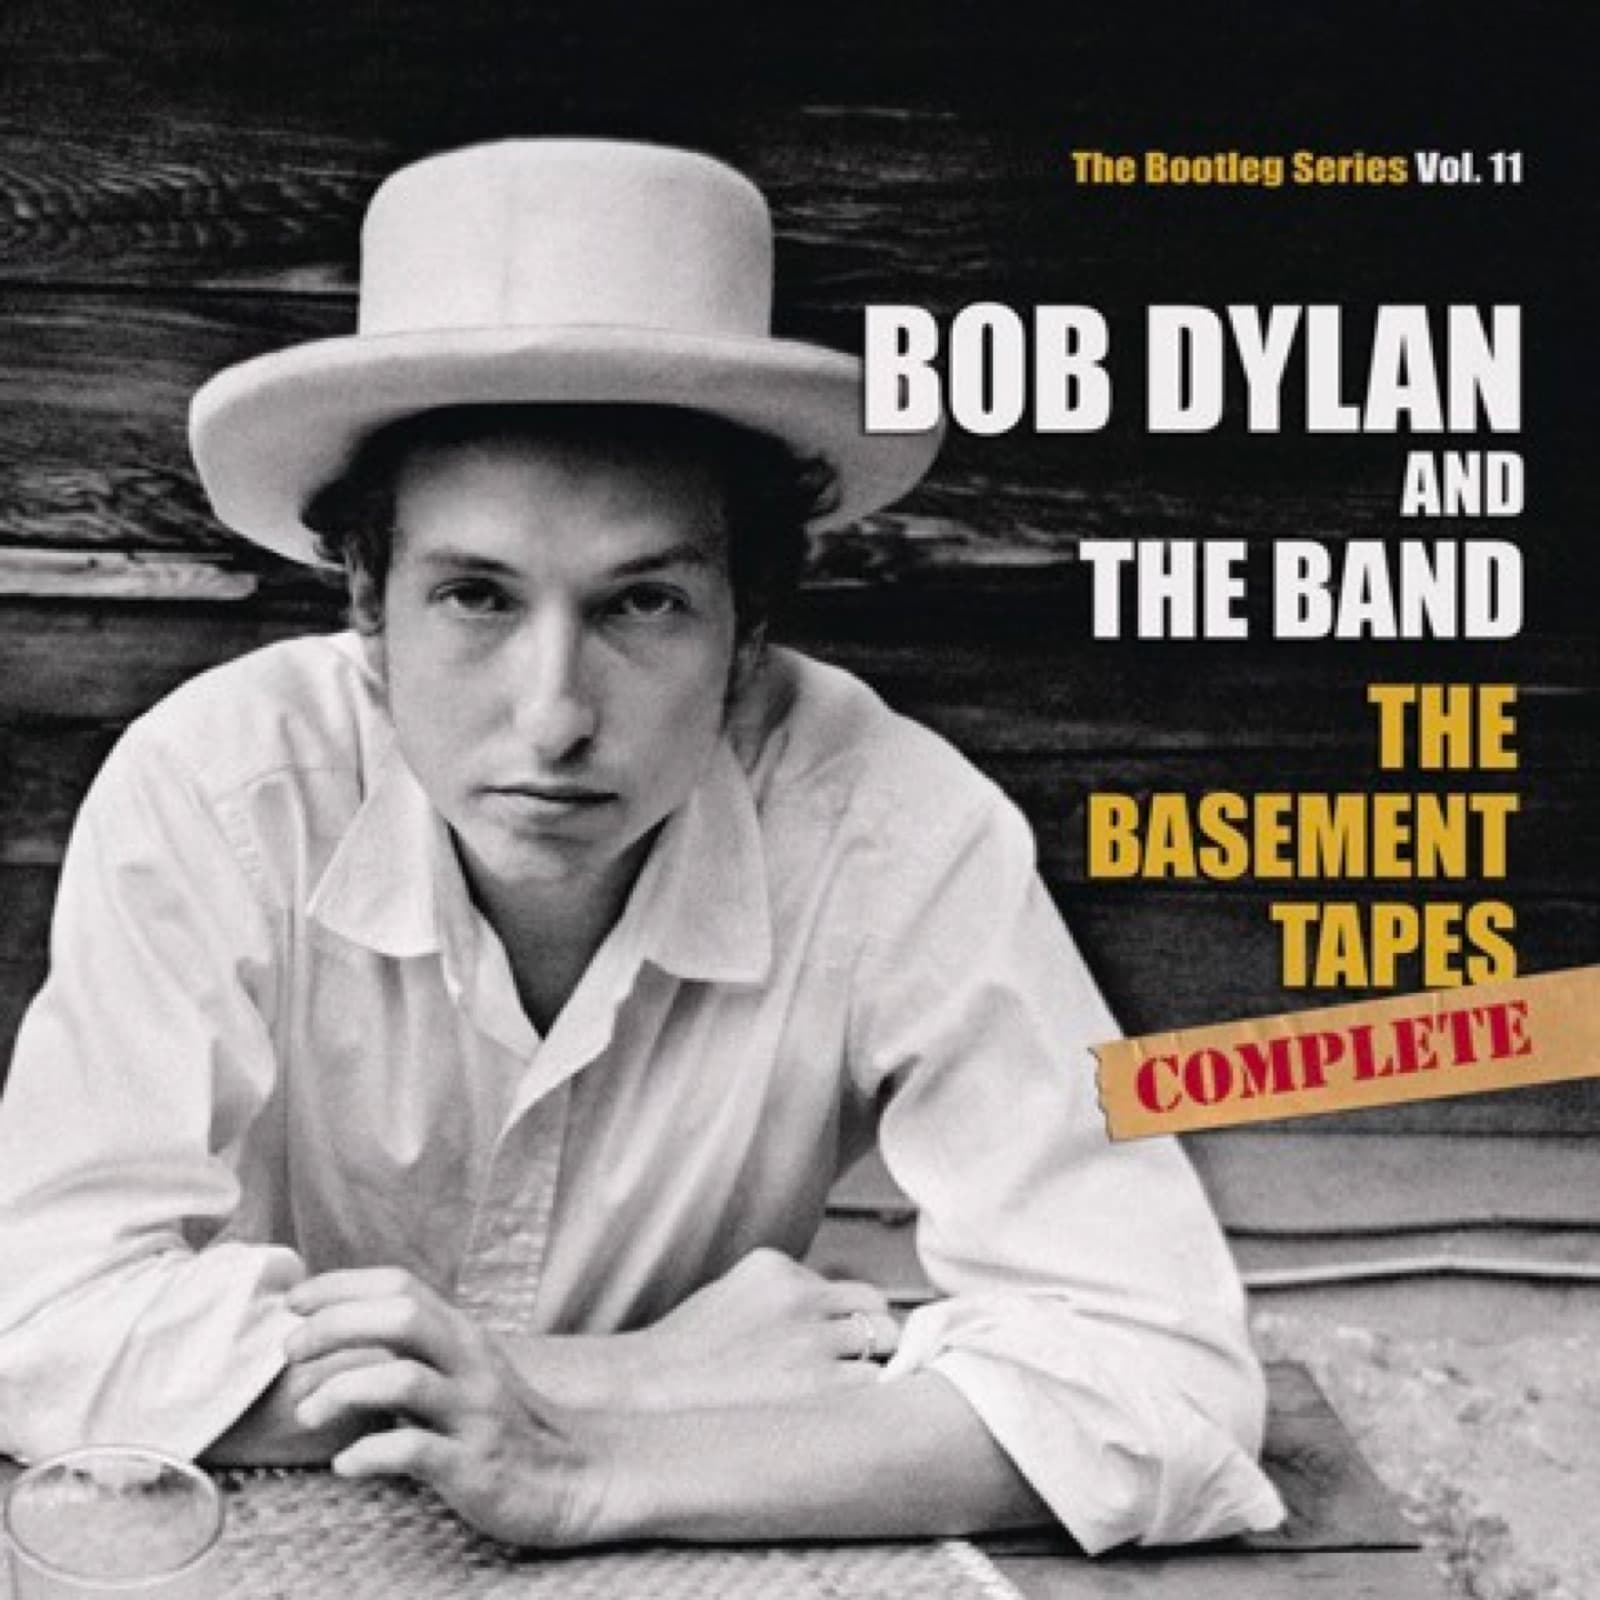 The Basement Tapes Complete The Bootleg series vol 11